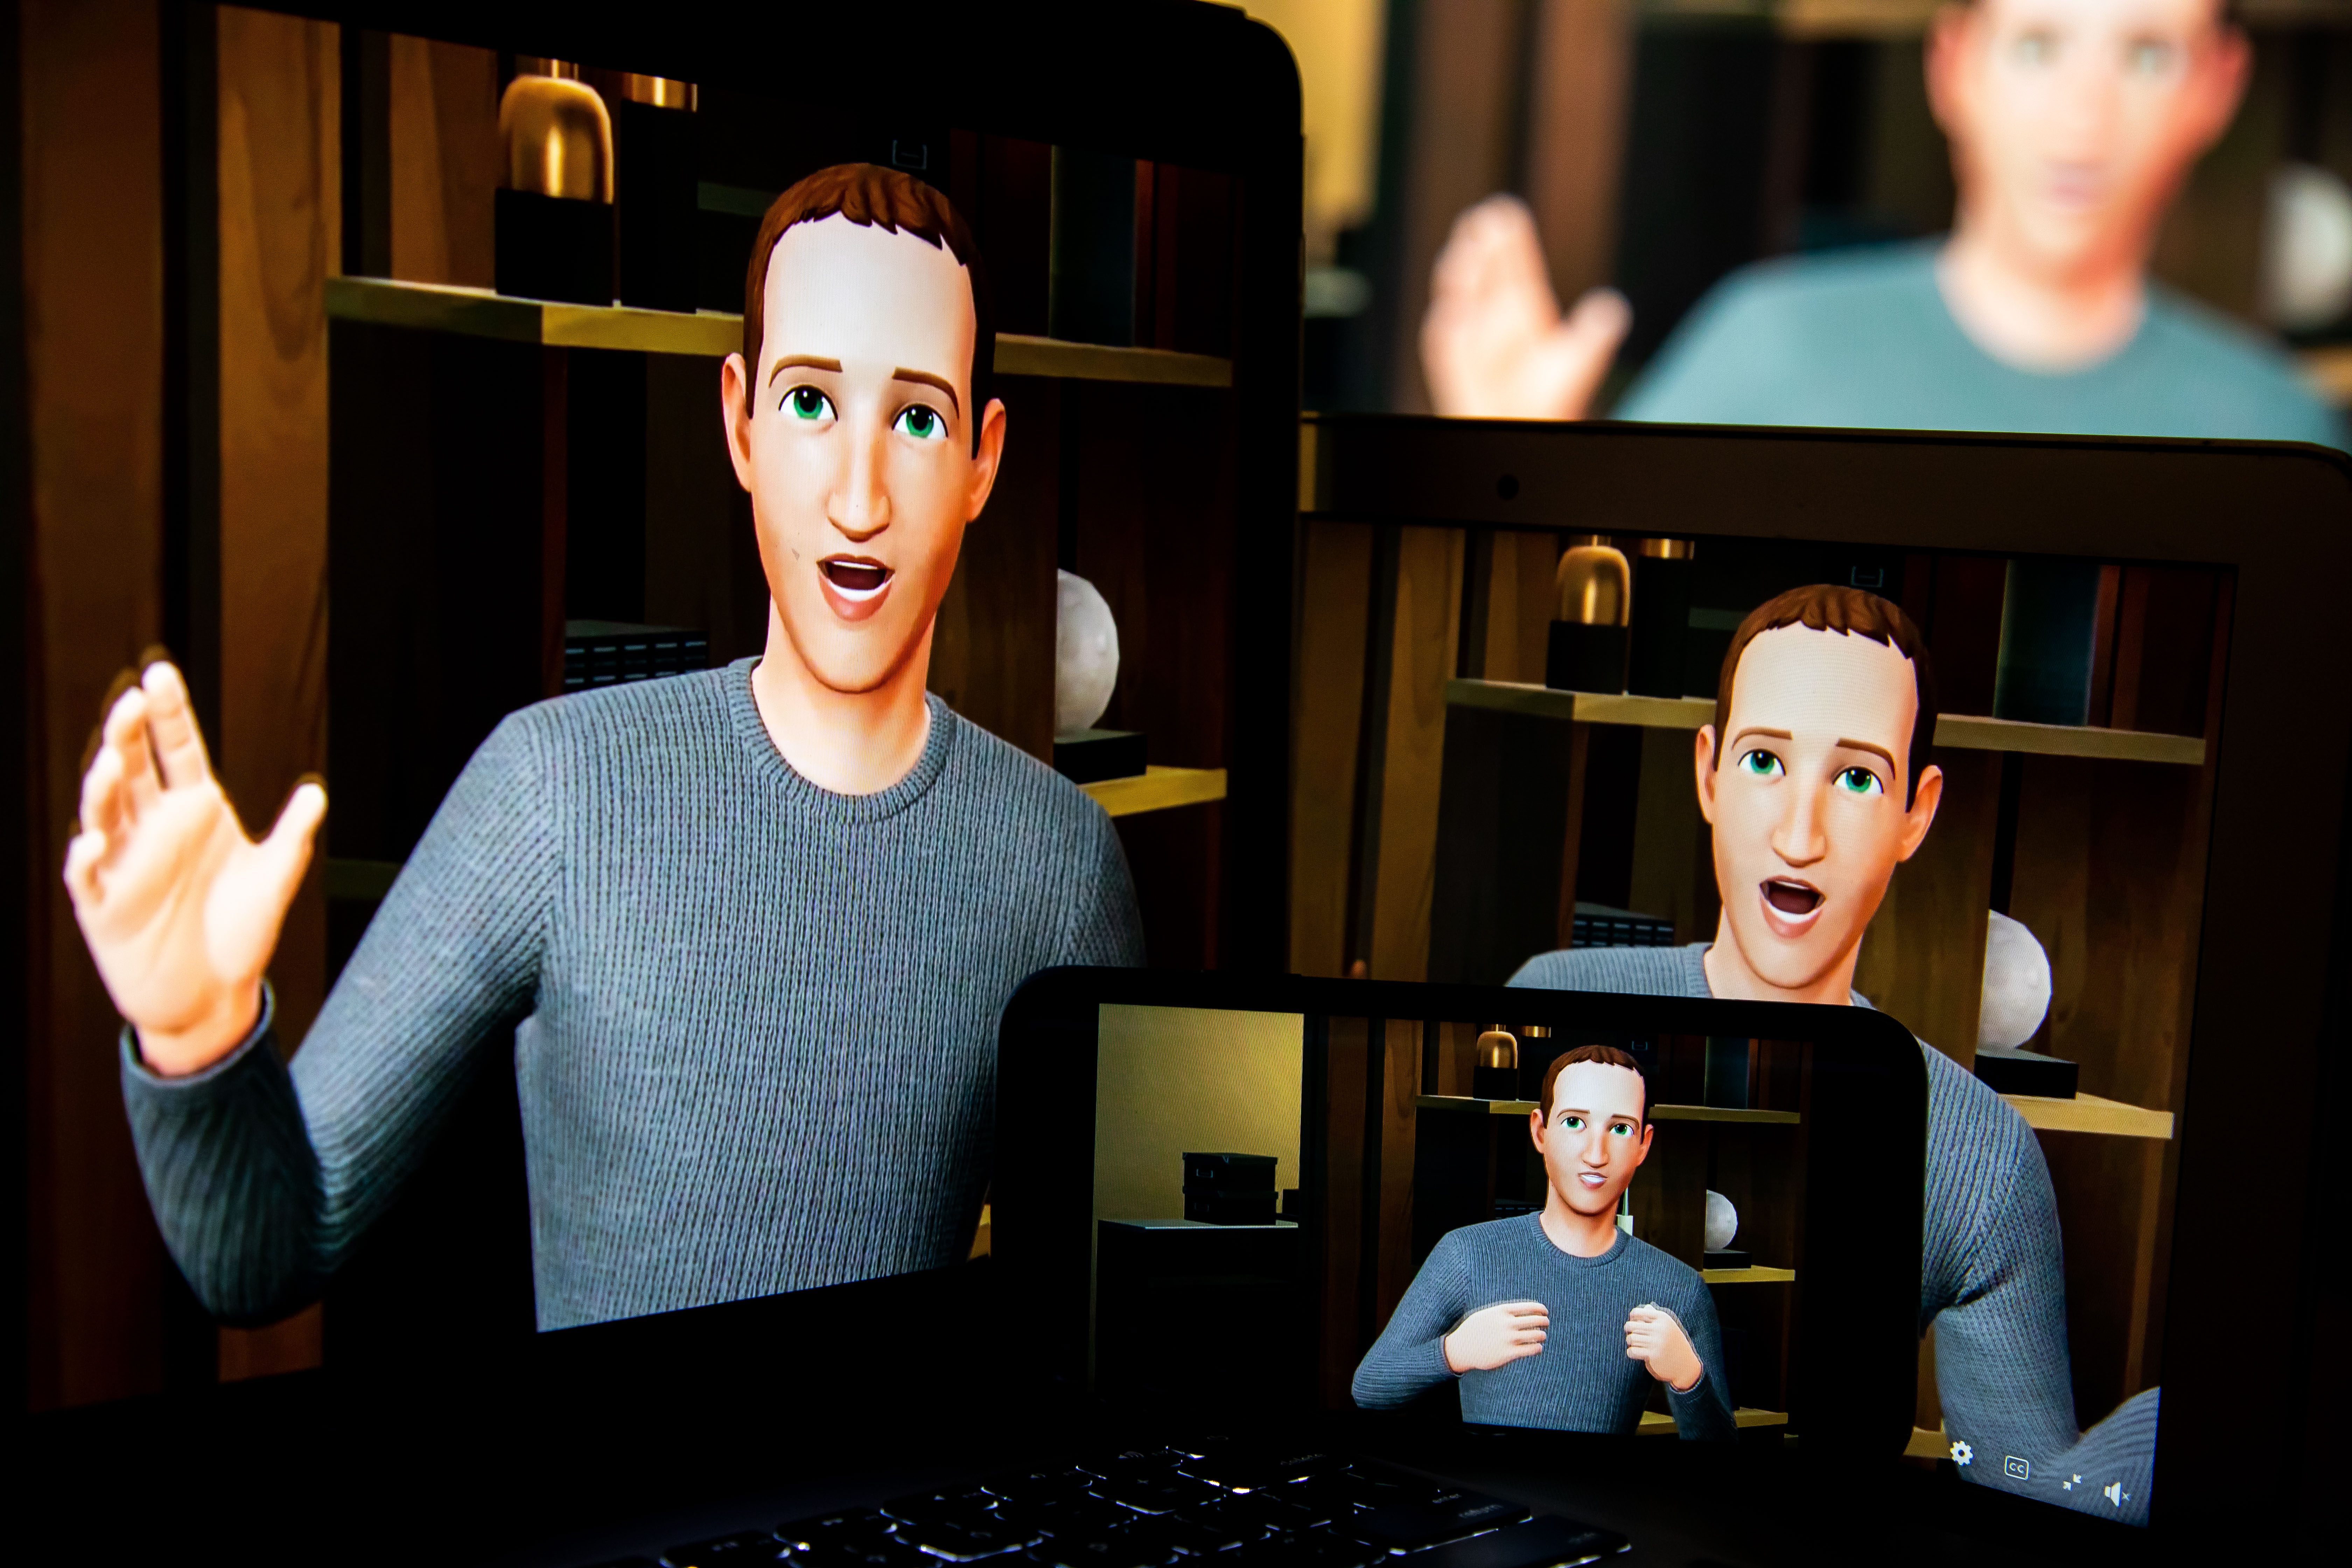 Images of the virtual brand Zuckerberg in the Metaverse